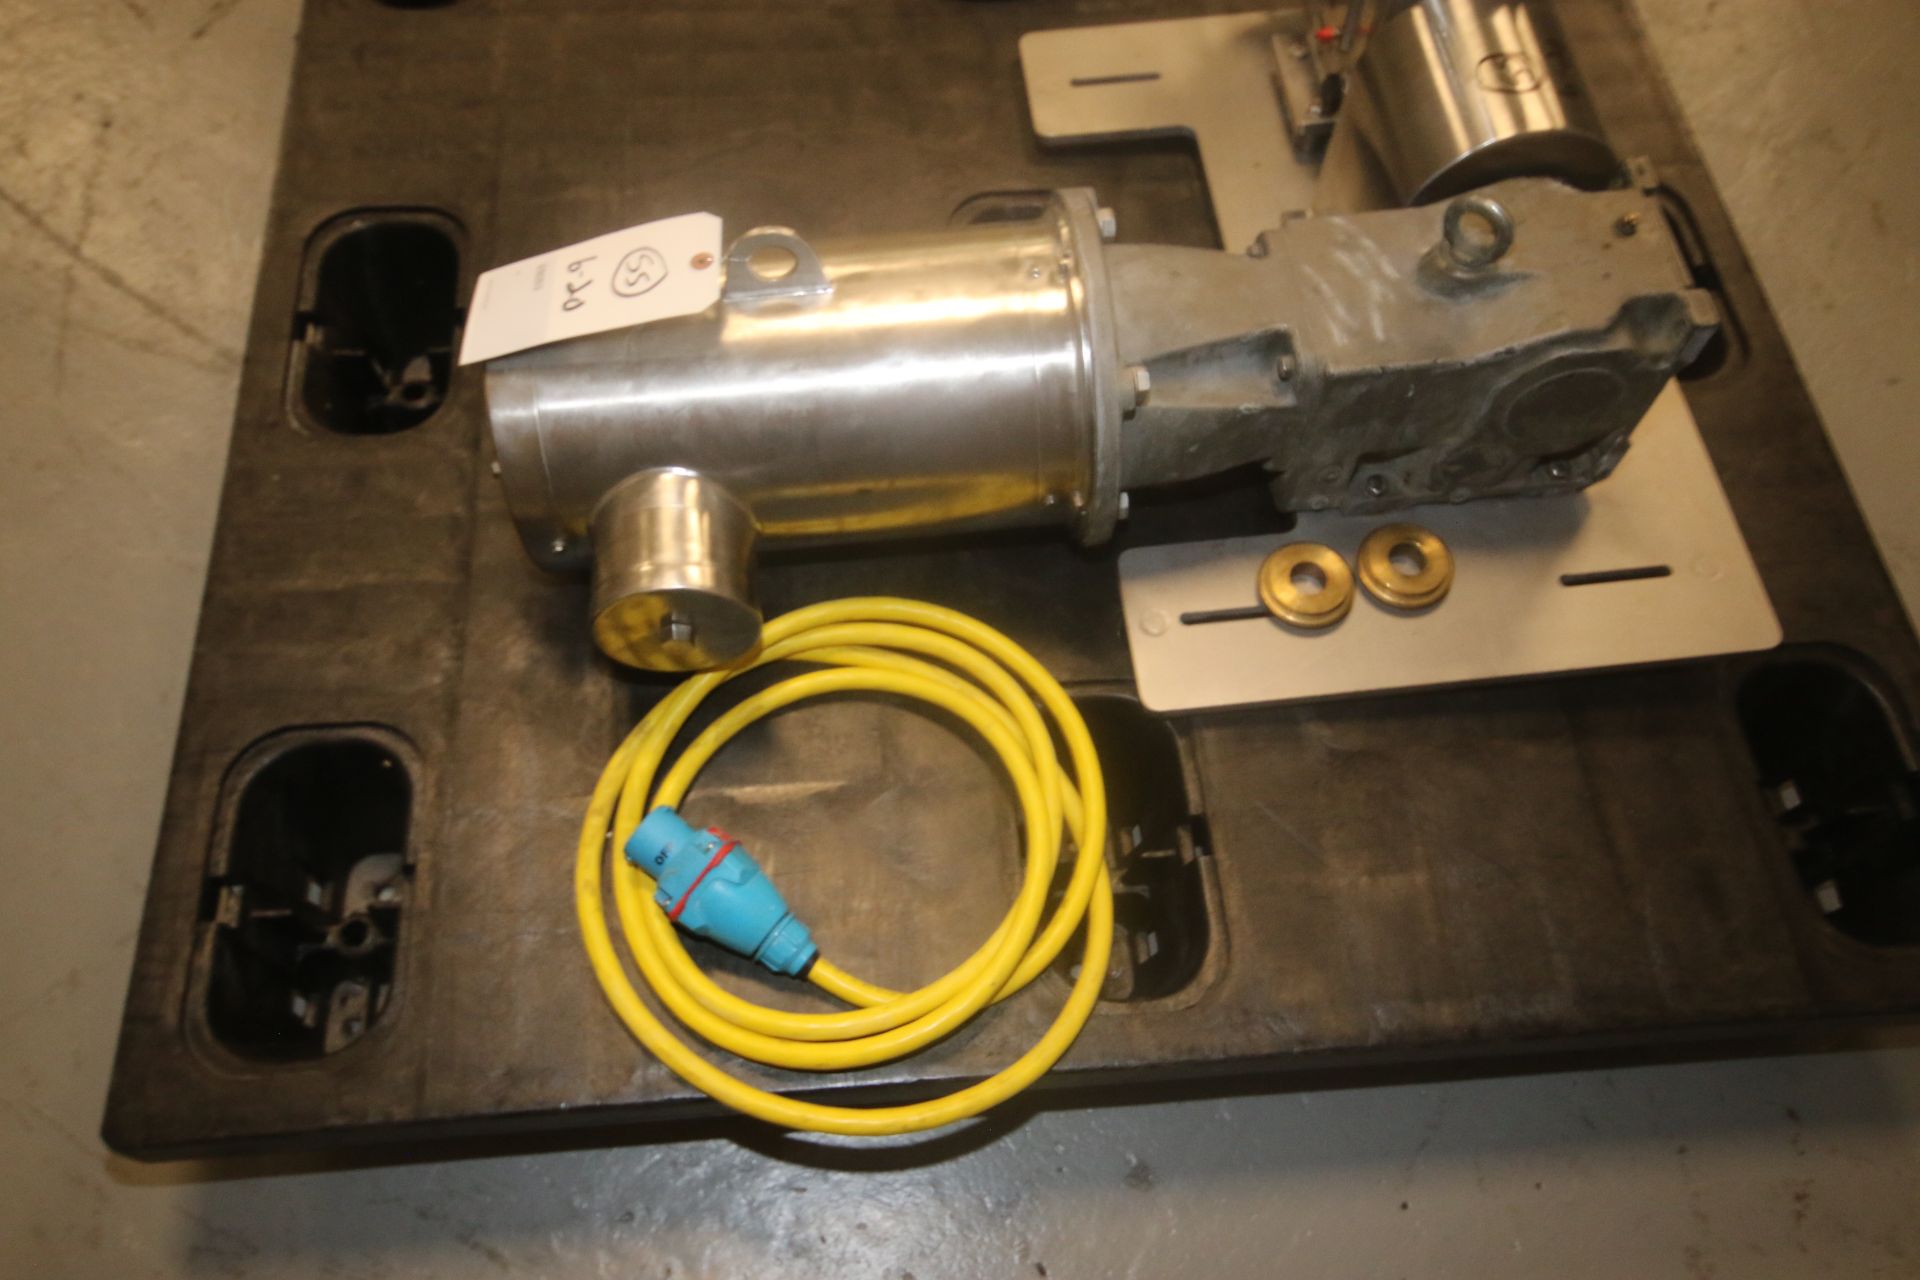 Ampco 3 hp S/S Positive Displacement Pump, M/N ZP1+030-S0, S/N 1934541-10-1, with Baldor 1750 RPM - Image 14 of 14